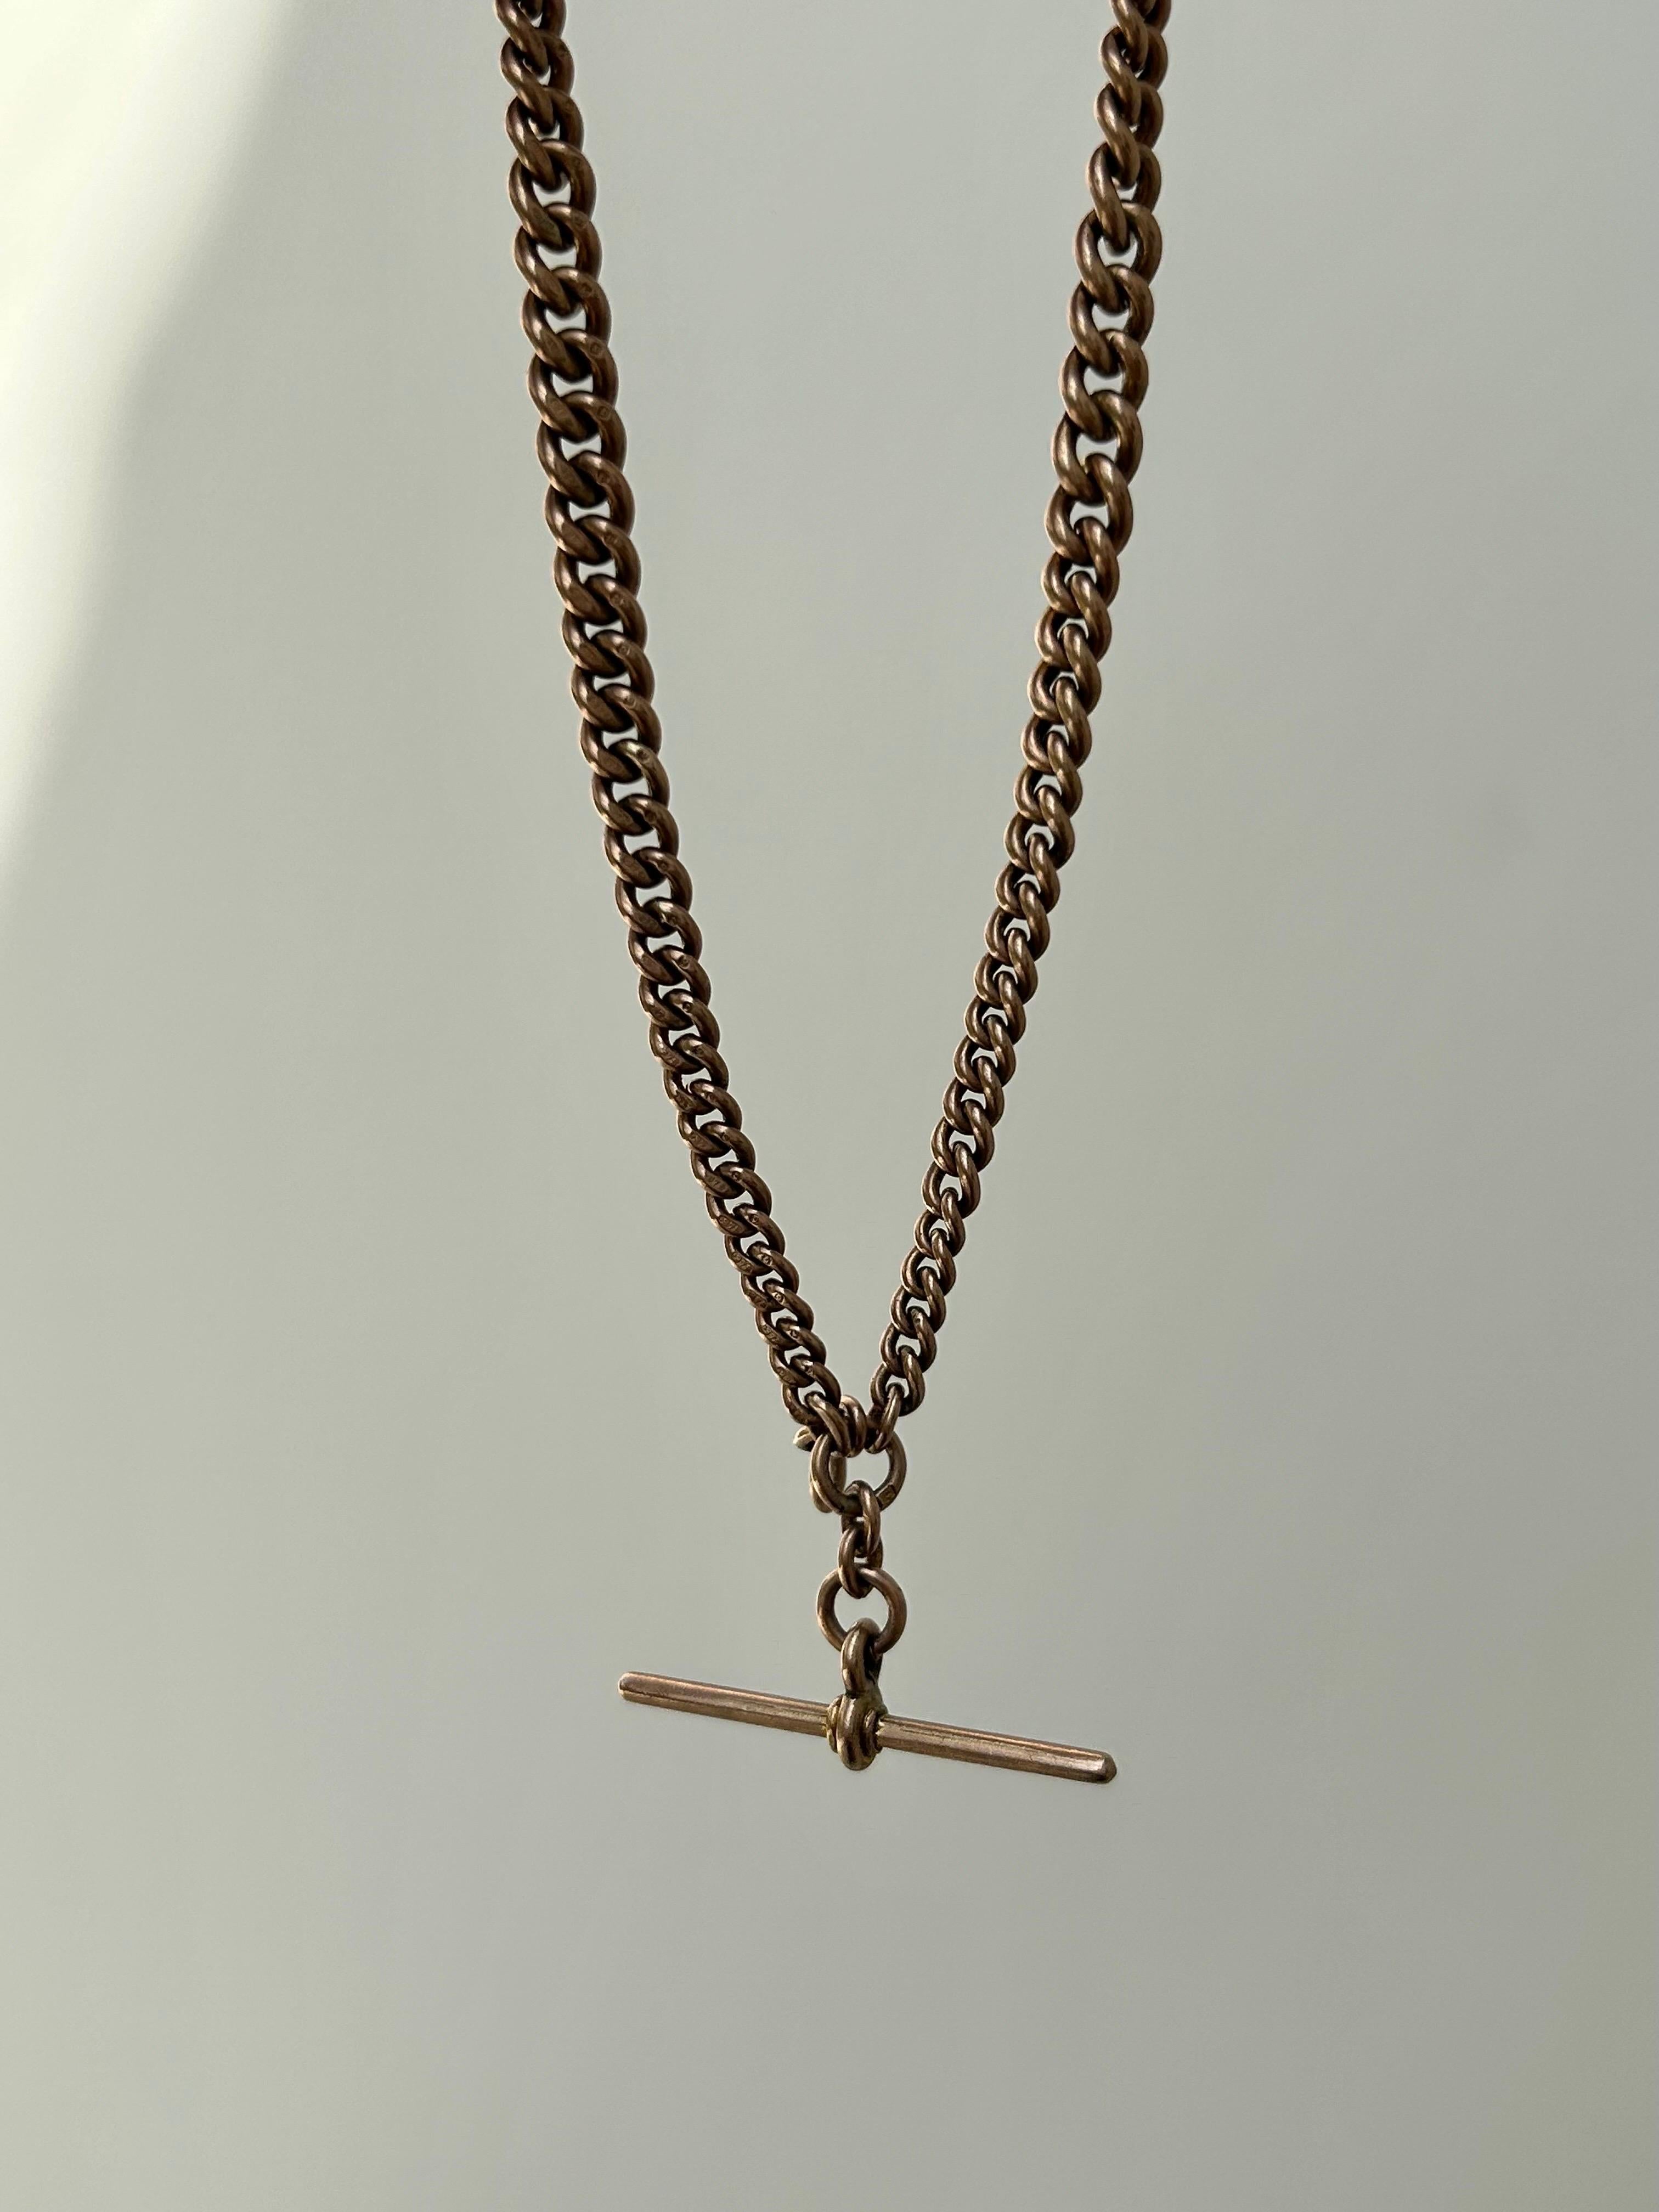 Antique Heavy 9 Carat Gold Double Albert Chain Necklace with TBar In Good Condition For Sale In Chipping Campden, GB